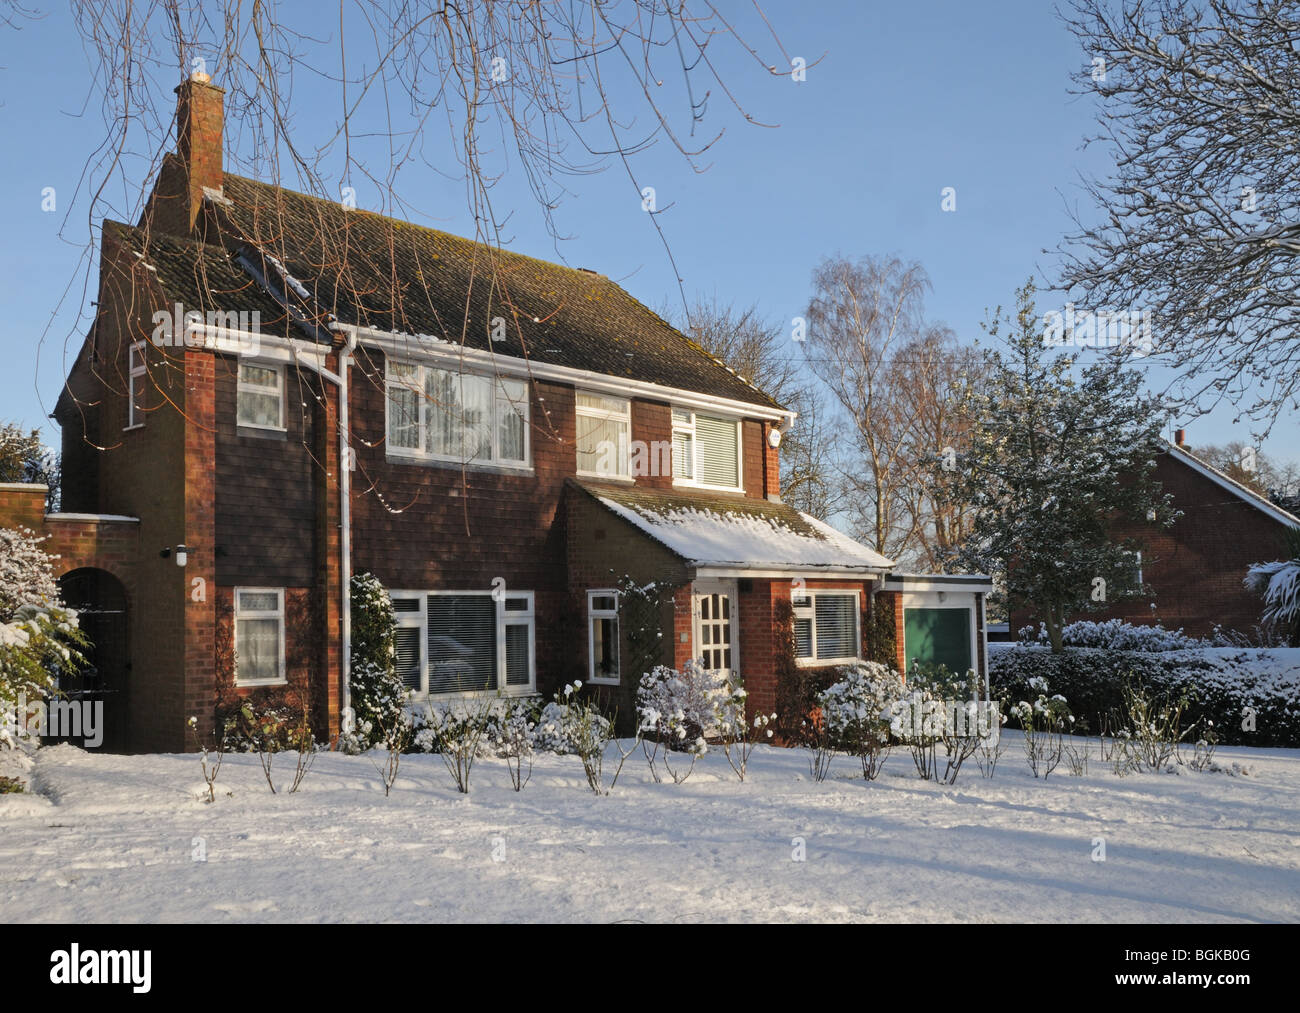 1960’s suburban detached four bedroomed house Lichfield Staffordshire on snowy winter’s day 2010 Stock Photo